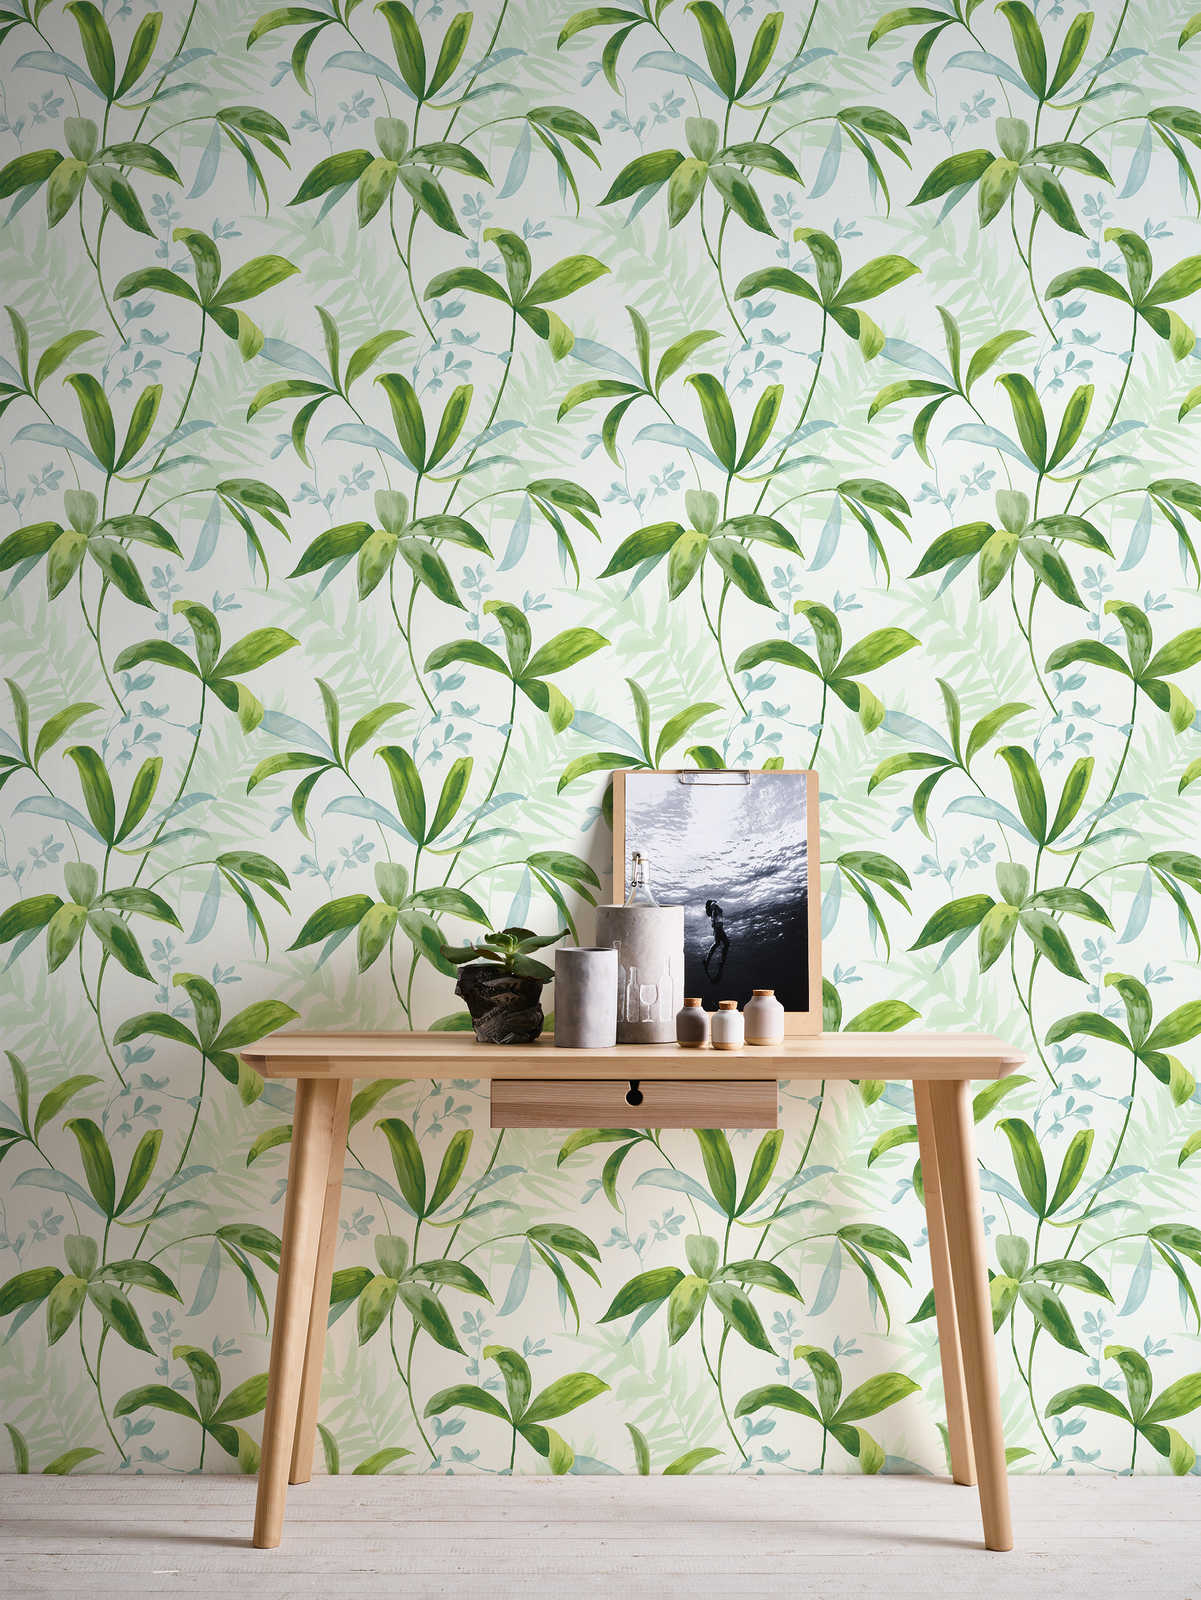             Non-woven wallpaper green leaves in watercolour style - green, white
        